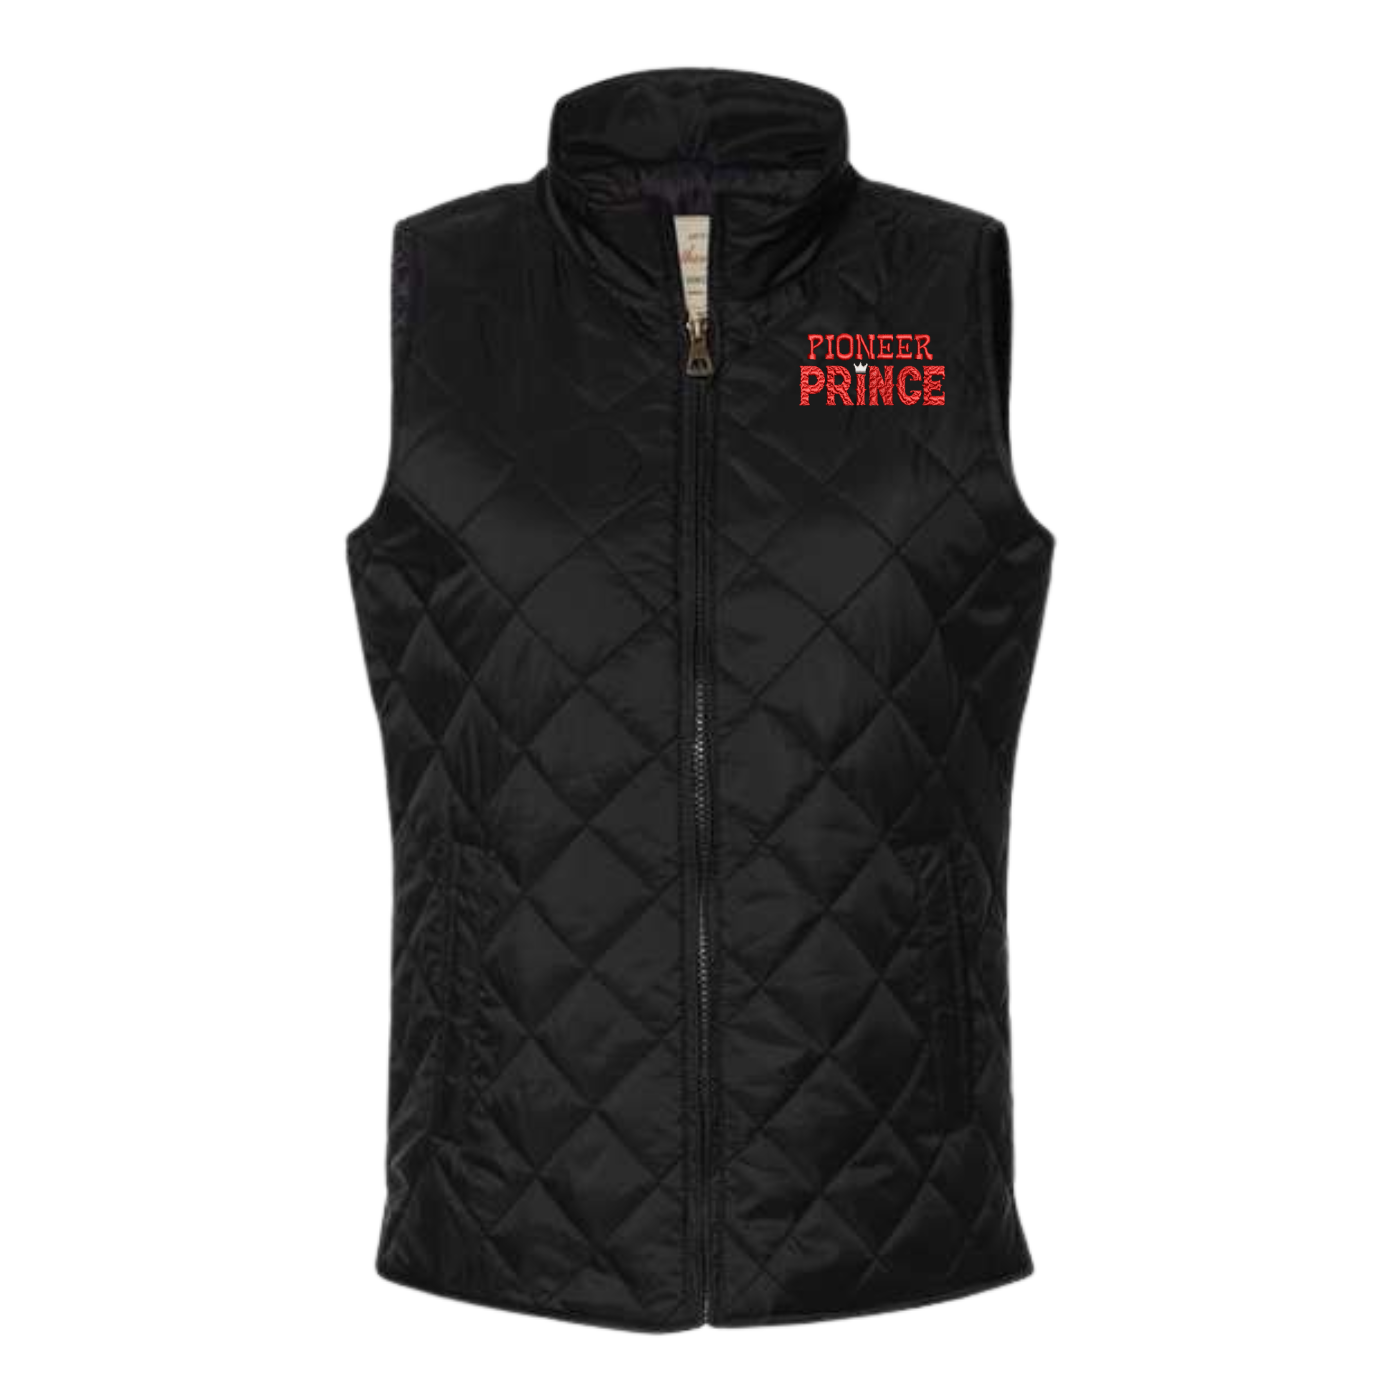 Pioneer Prince Women's Quilted Vest